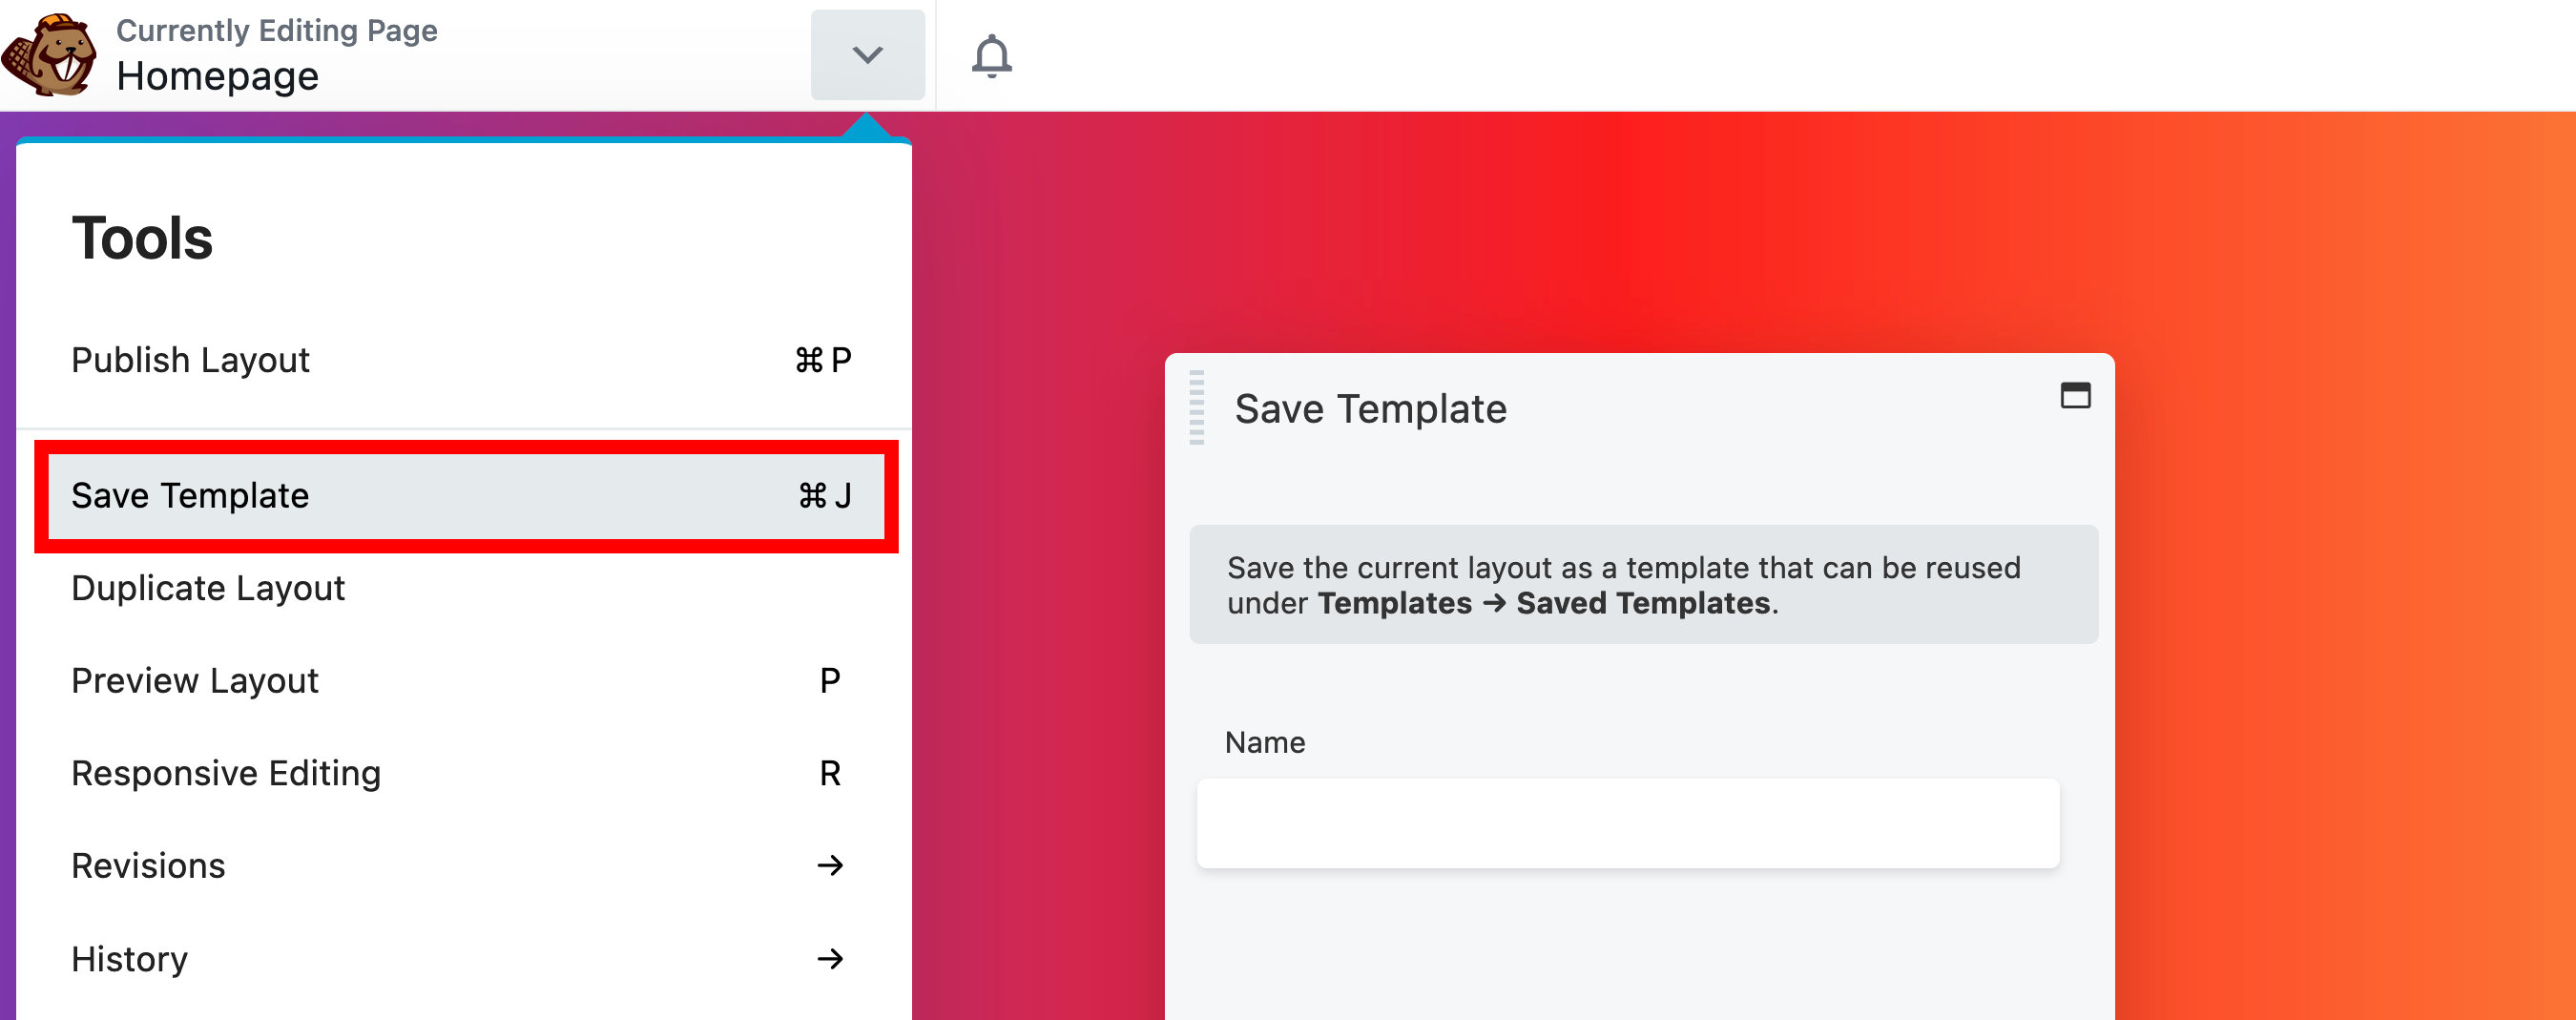 Save templates from the front-end